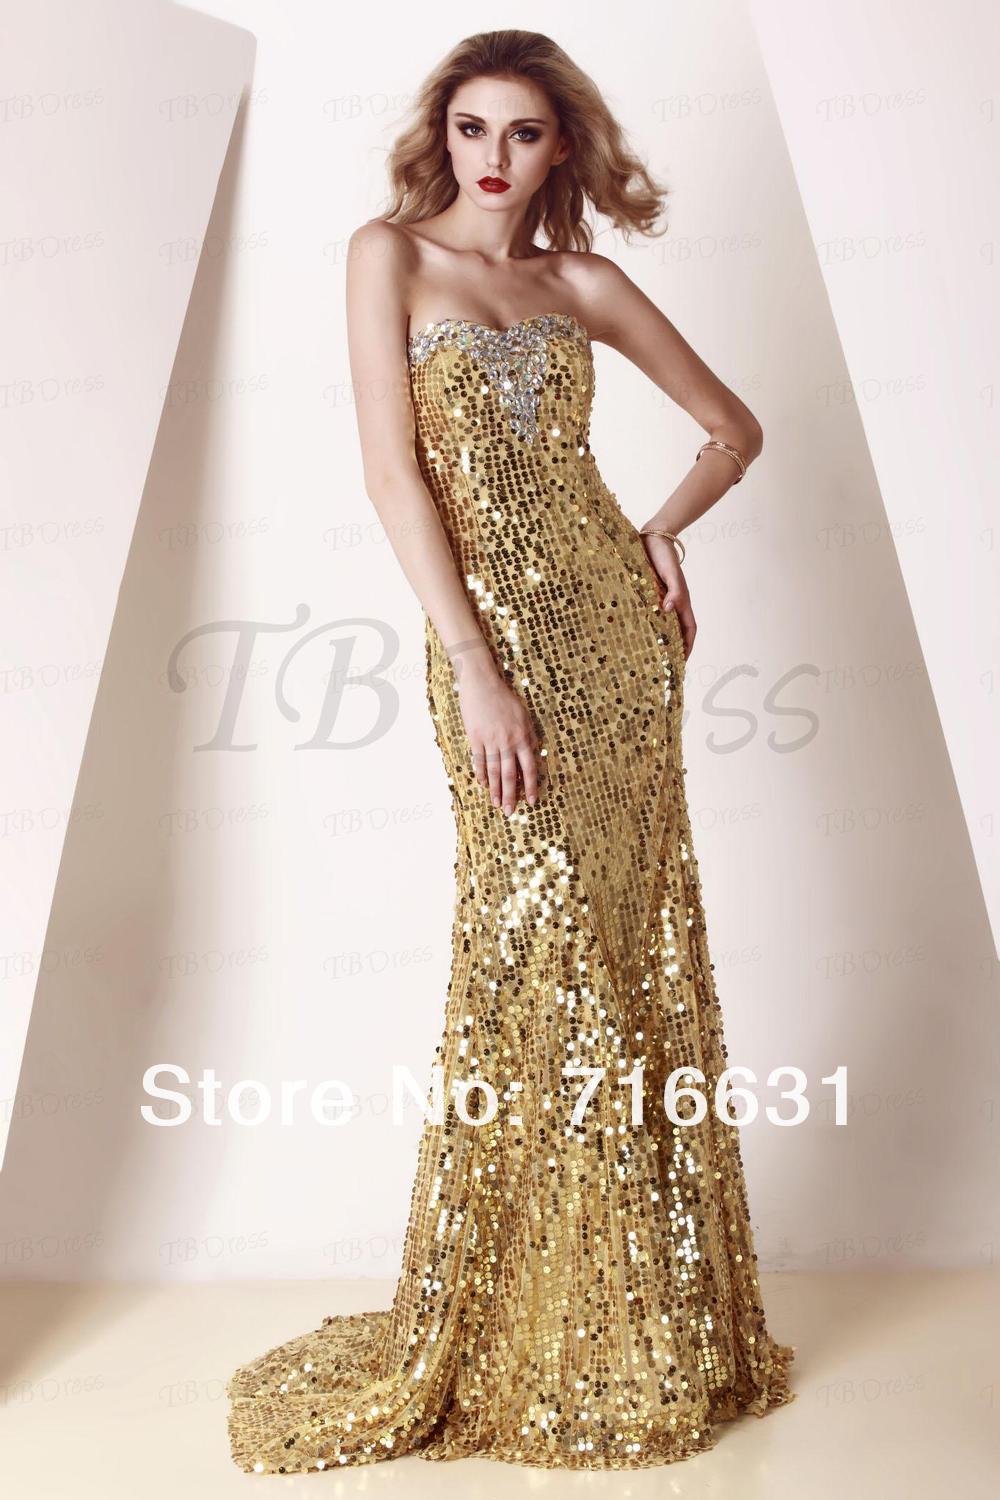 Sequined Gowns Affordable And Fashion Outlet Review